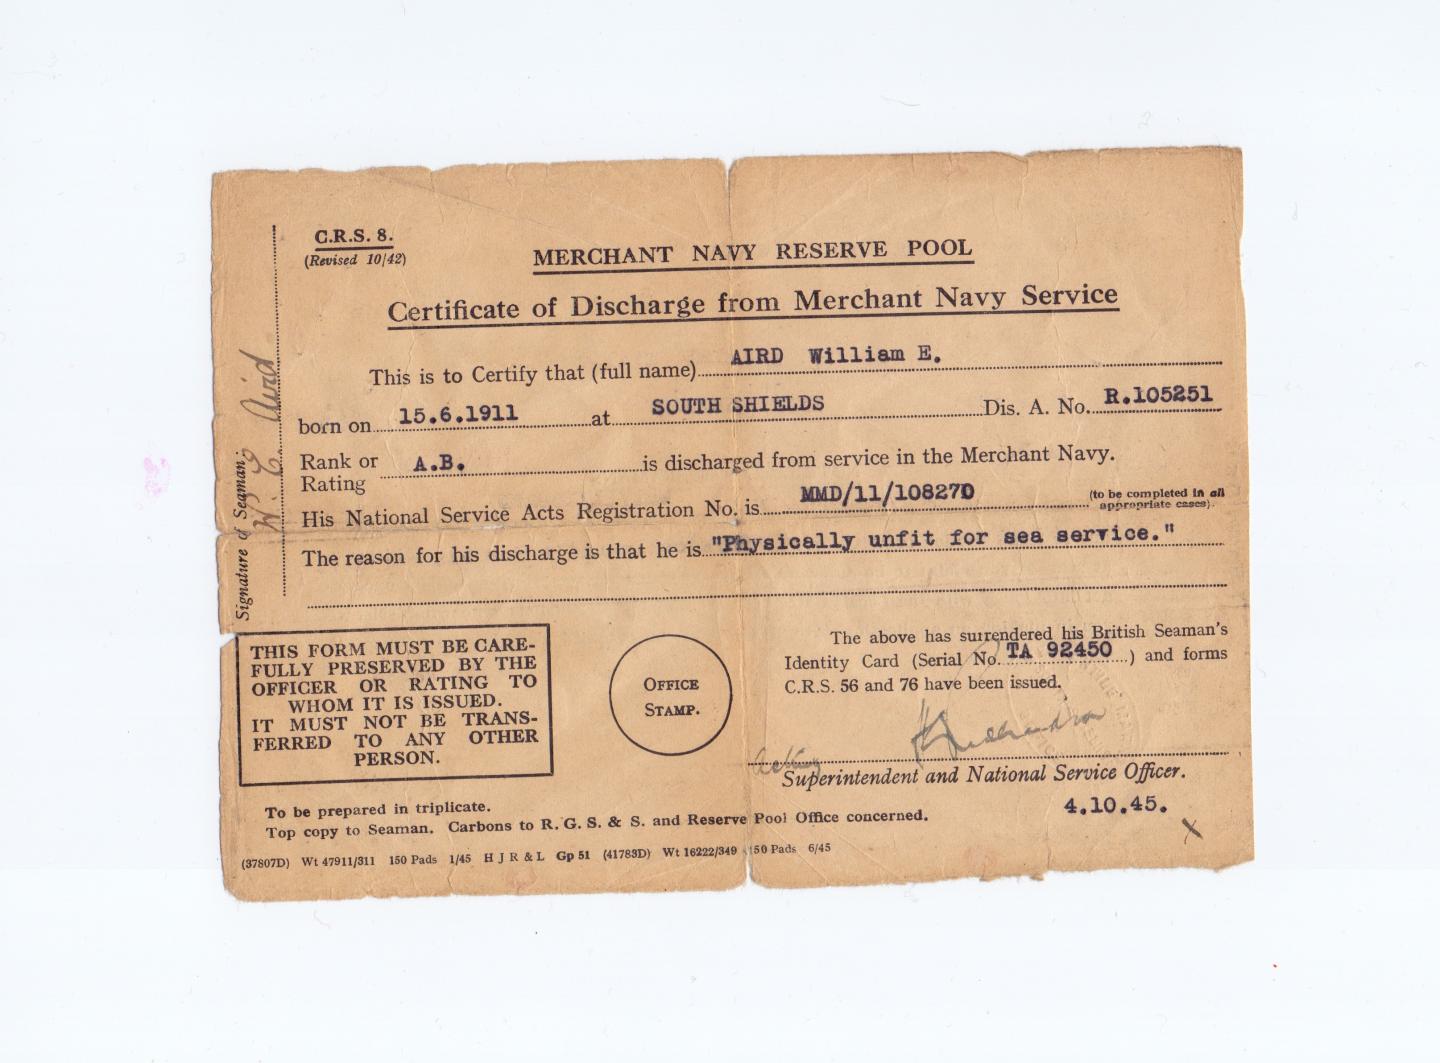 Discharge papers for William Aird